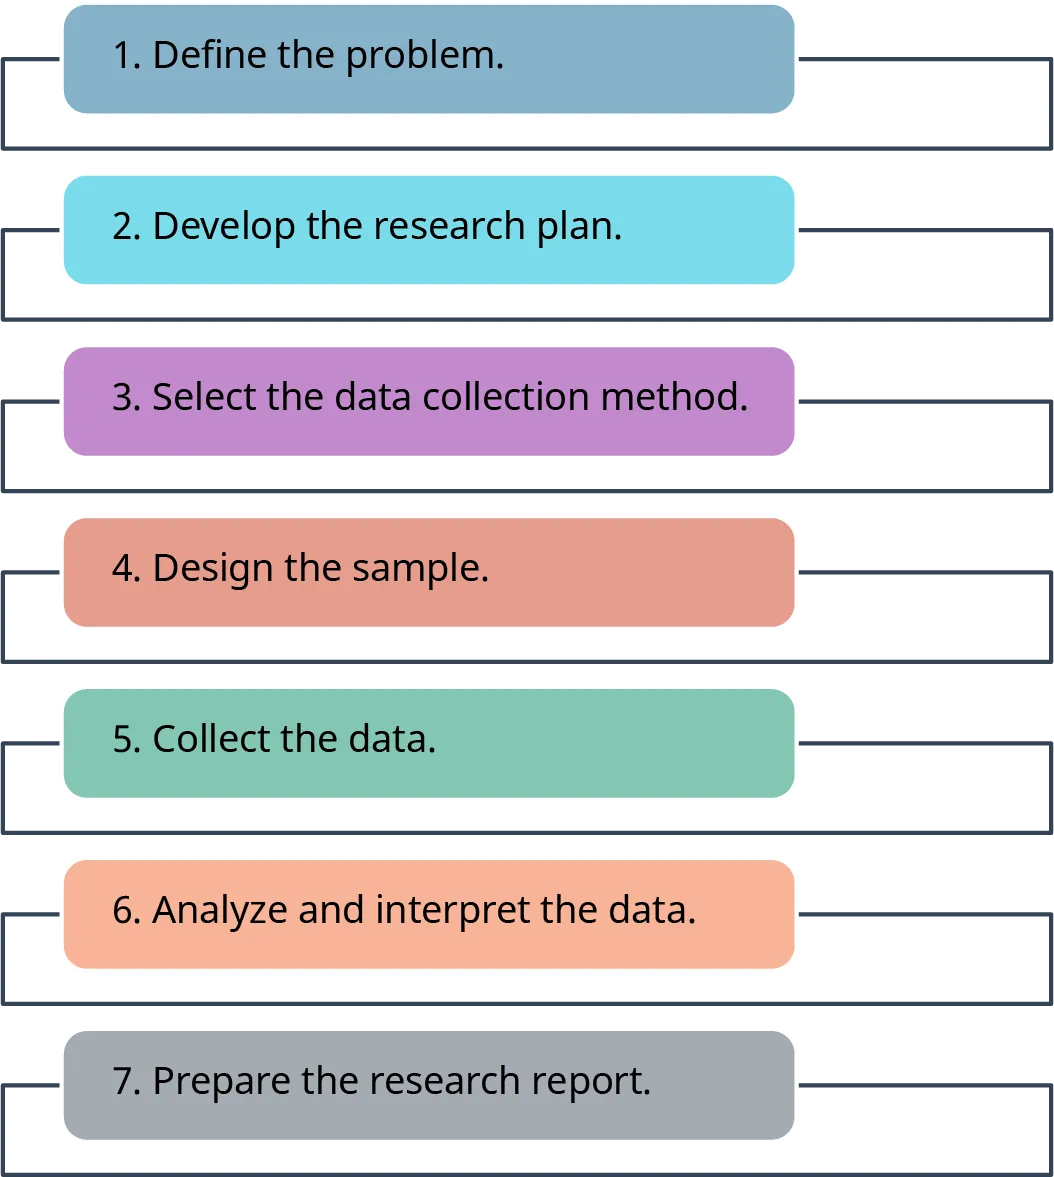 The seven steps to a successful market research project are: 1. define the problem; 2. develop the research plan; 3. select the data collection method; 4. design the sample; 5. collect the data; 6. analyze and interpret the data; and 7. prepare the research report.